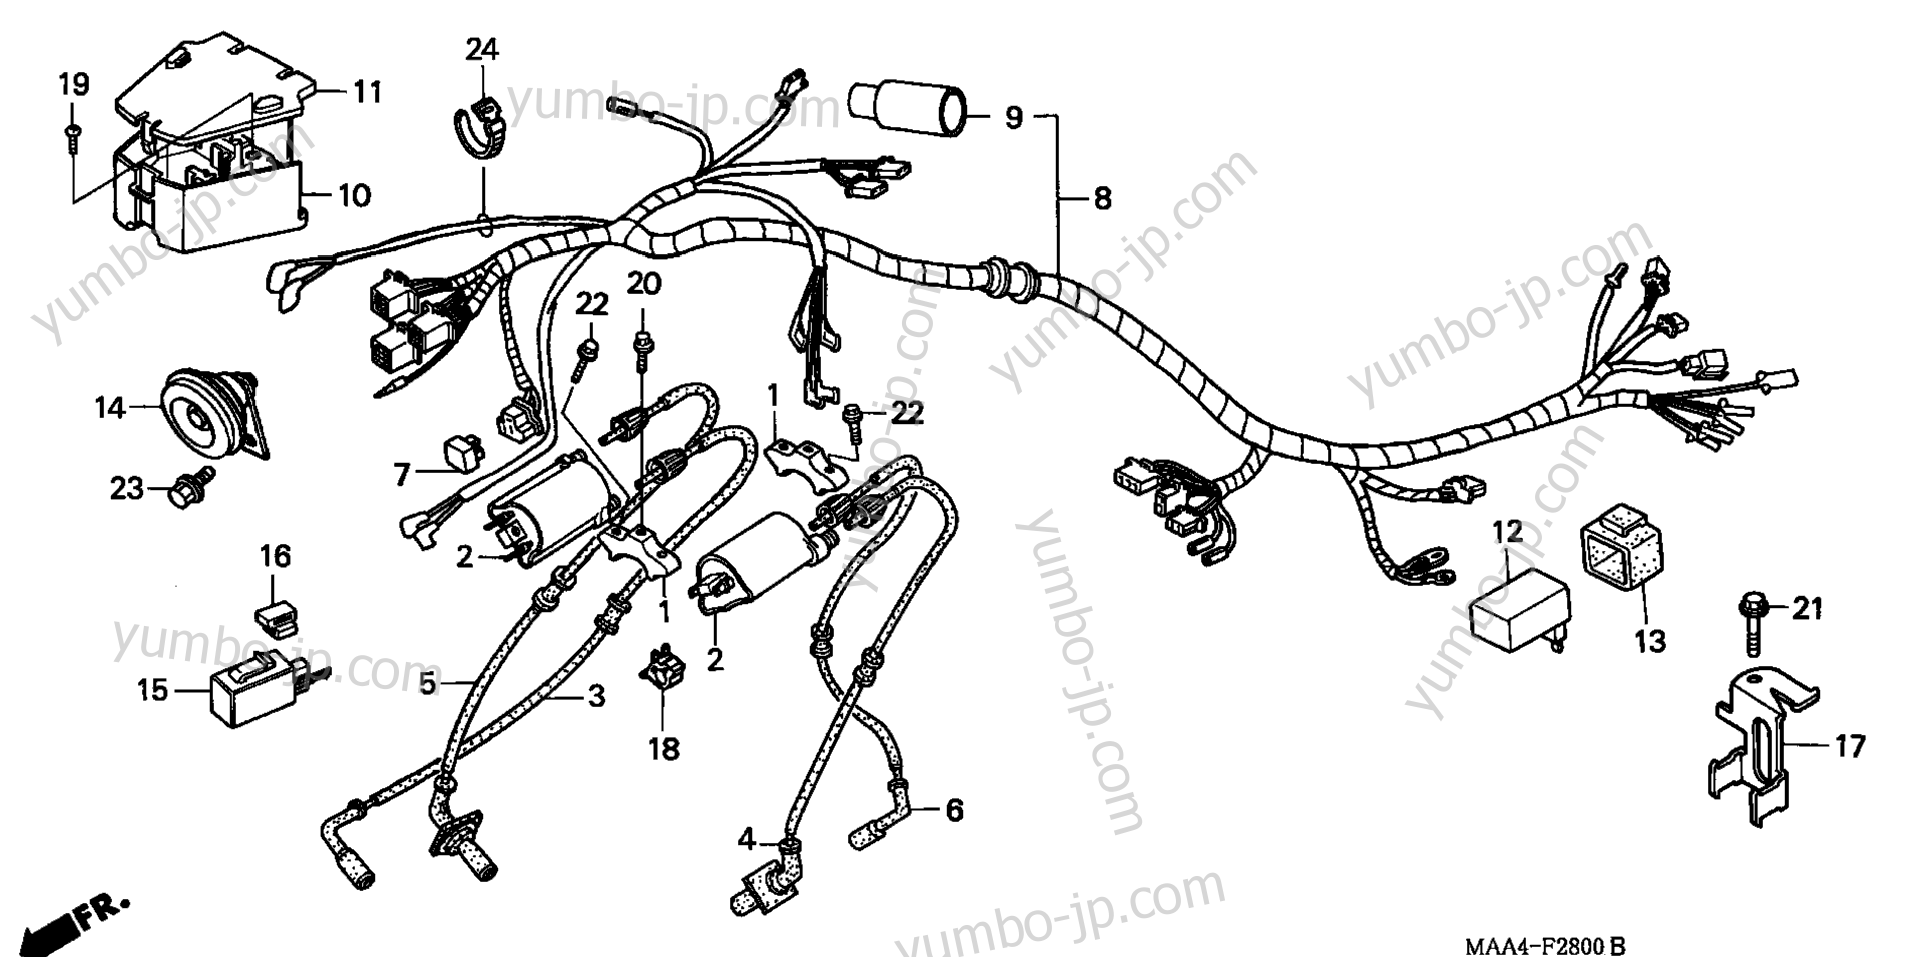 WIRE HARNESS (1) for motorcycles HONDA VT1100C A 1998 year